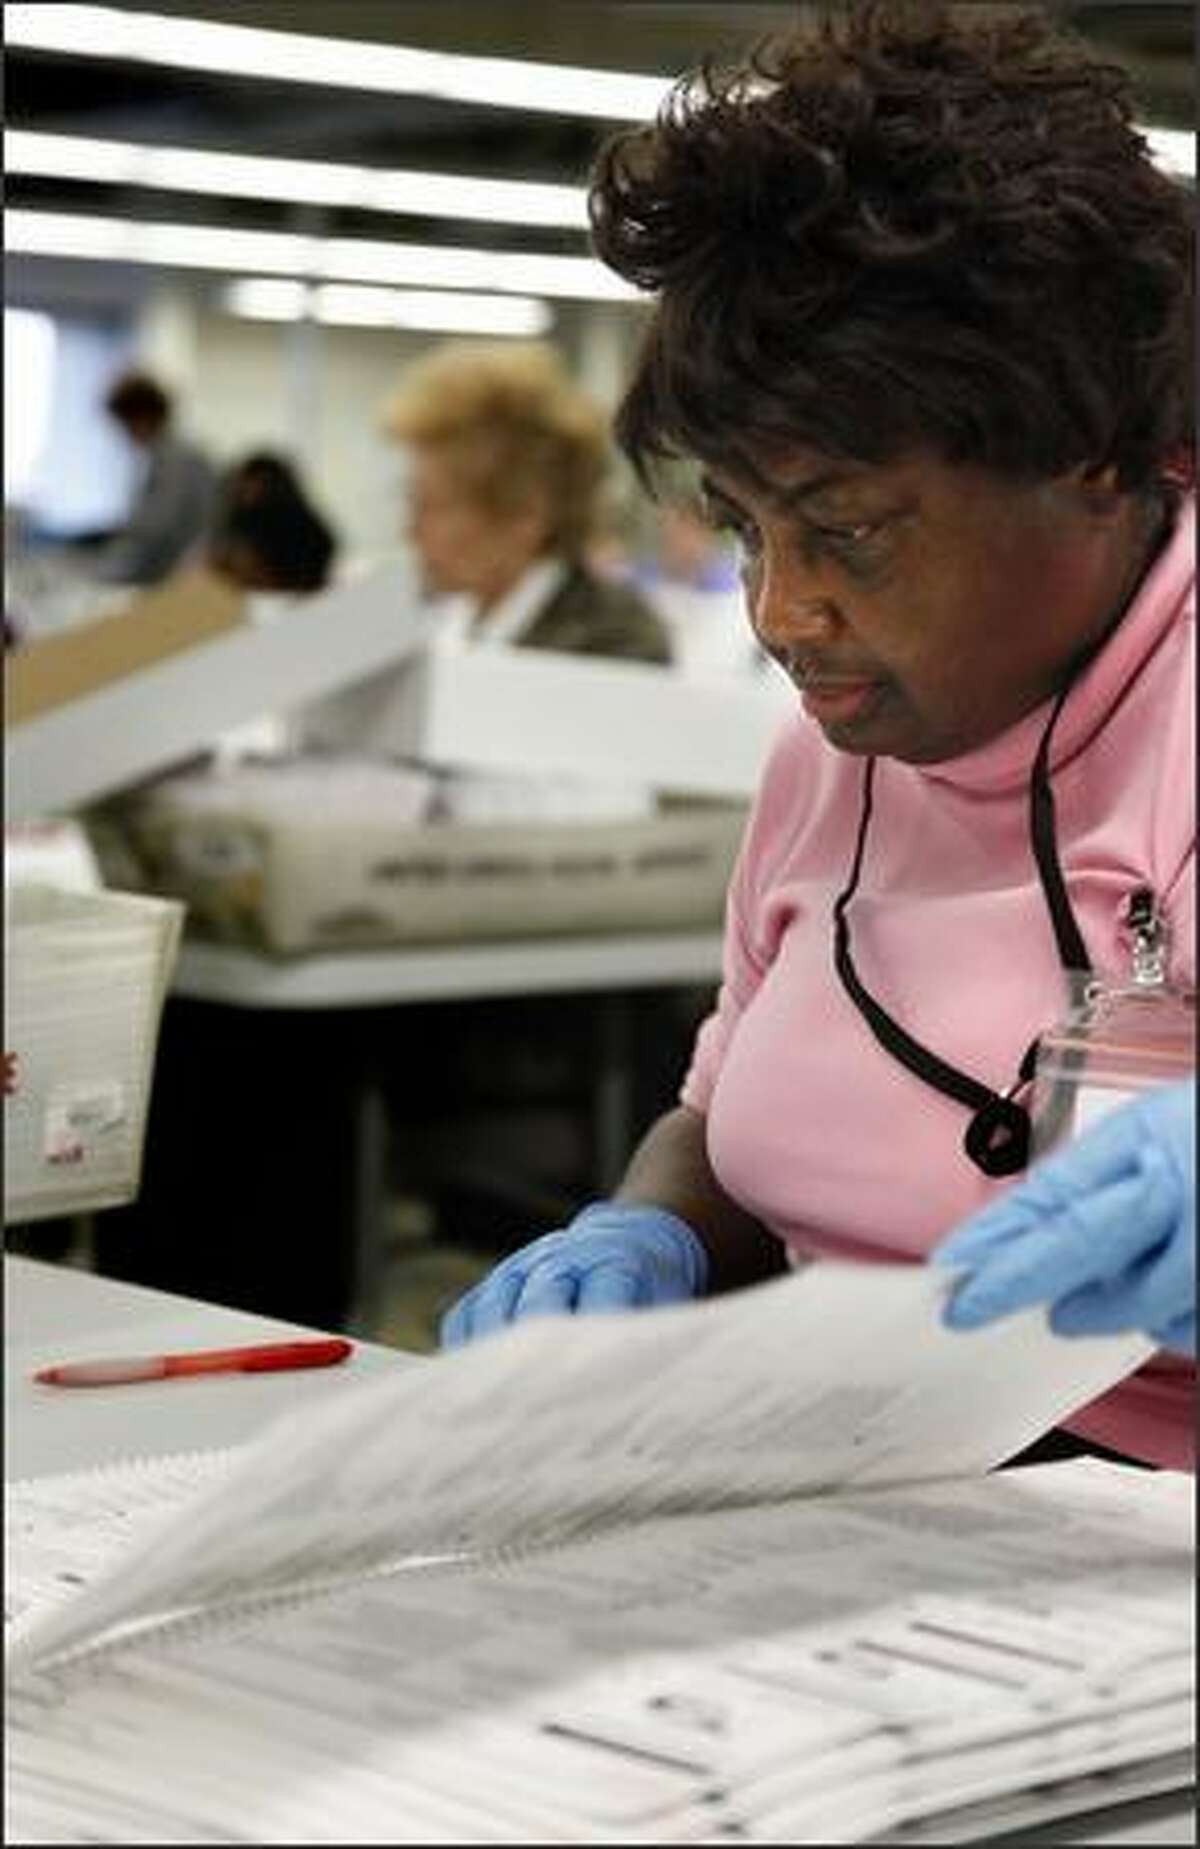 Mary Isabell opens and inspect ballots at the King County Elections office in Renton onTuesday. When done, she seals the opened ballots in a box, then sends it along to be secured and eventually reopened and counted. (Andy Rogers / Seattle Post Intelligencer)